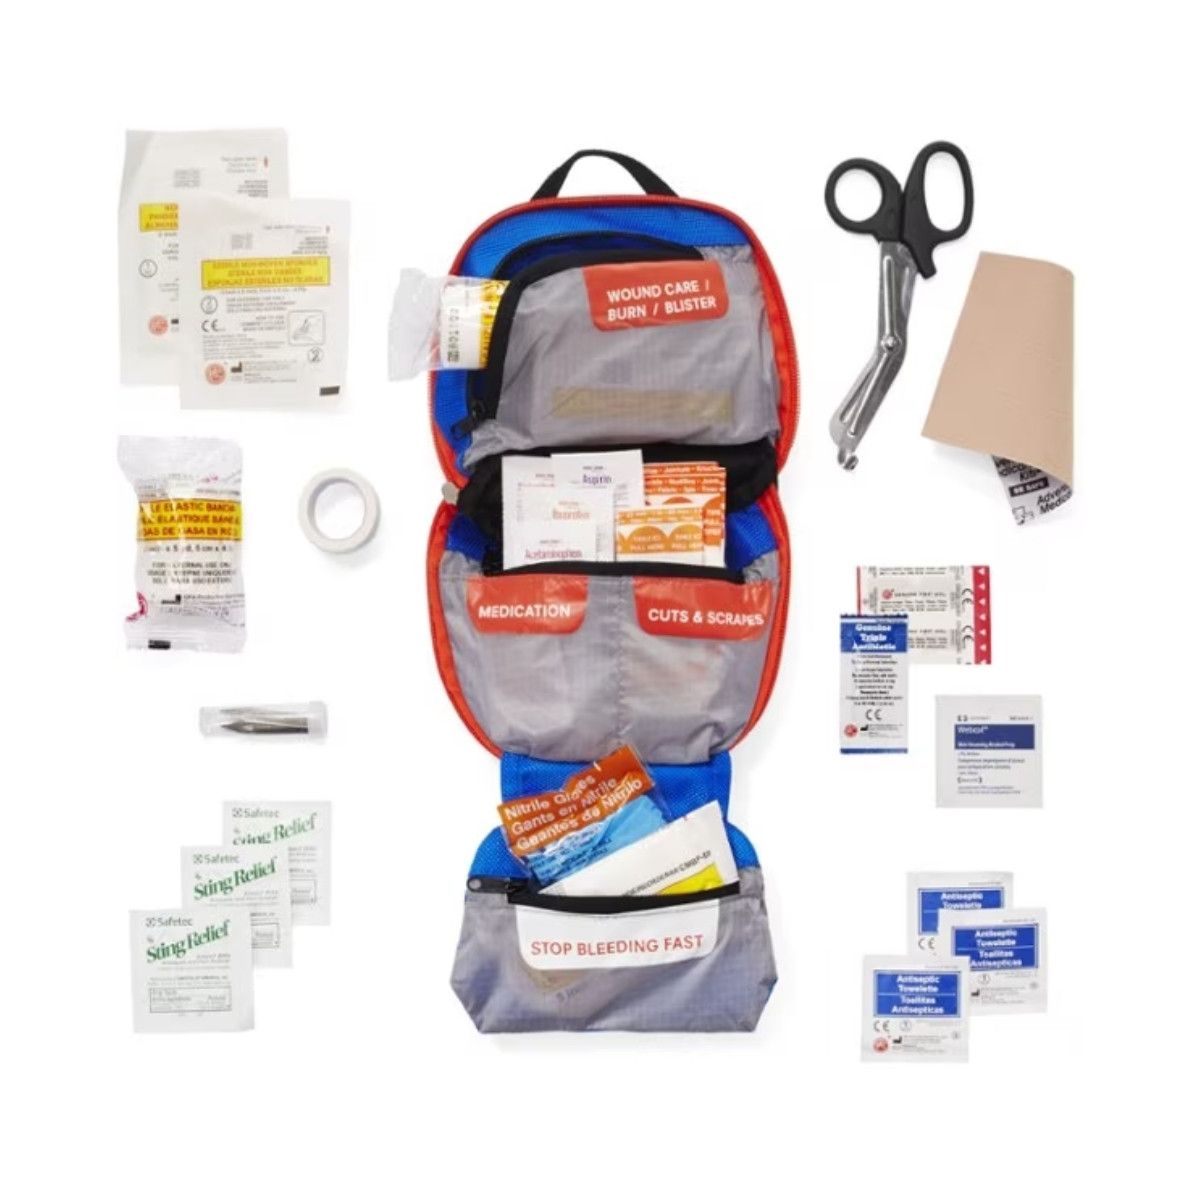 The adventure medical kit is essential for anyone who explores outdoors